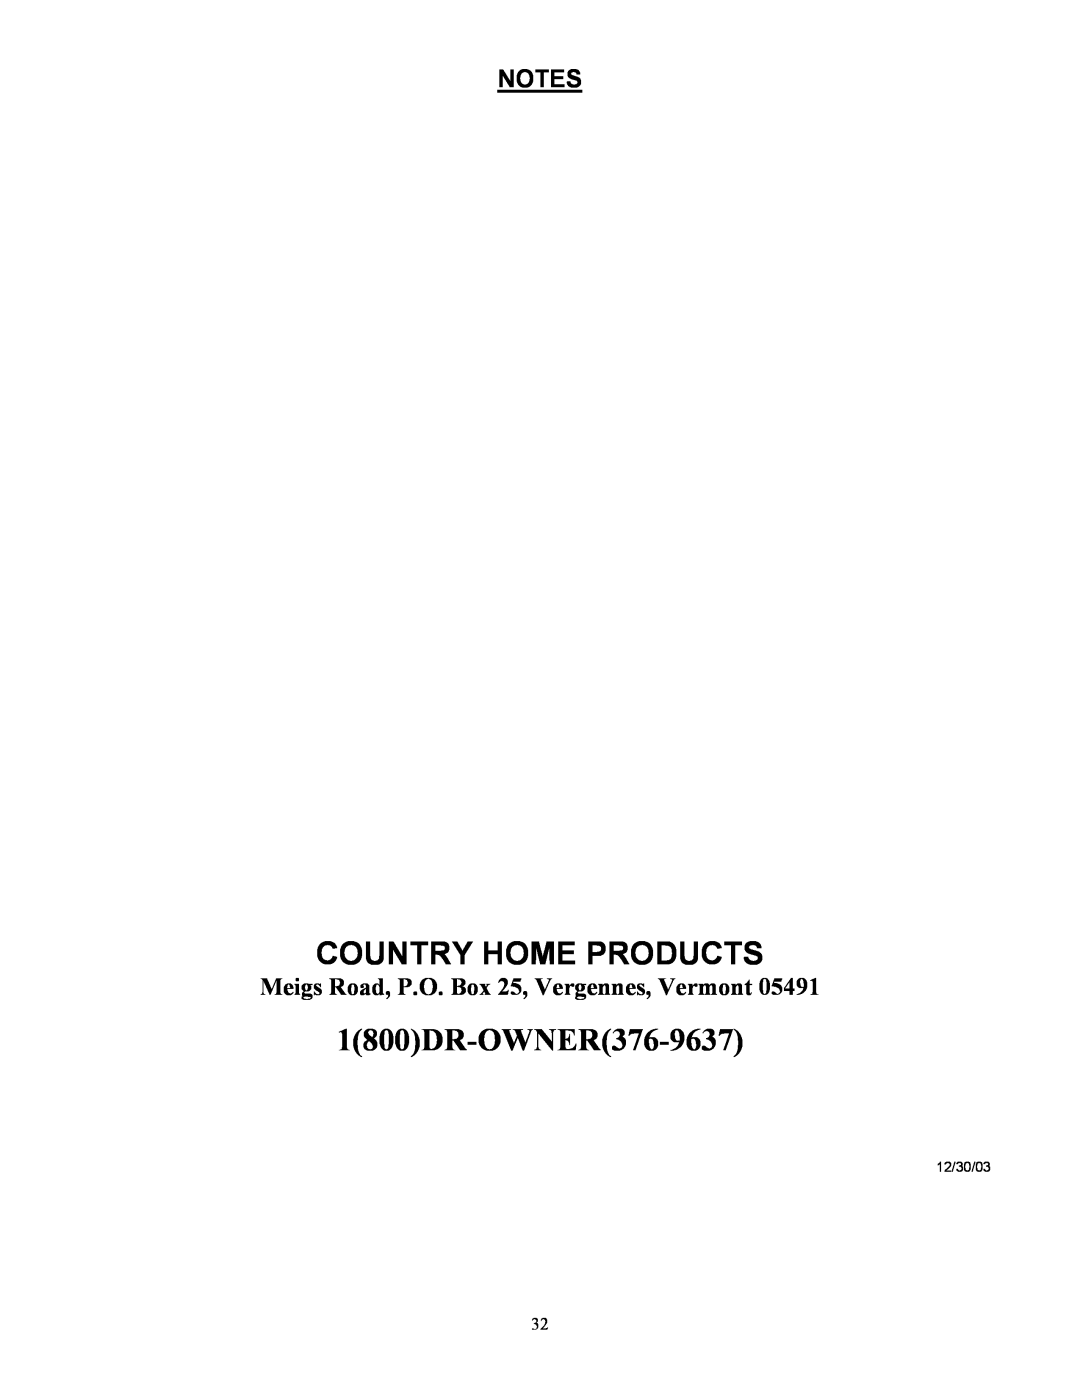 Country Home Products C123E-CHP instruction manual Notes, Country Home Products, 1800DR-OWNER376-9637 